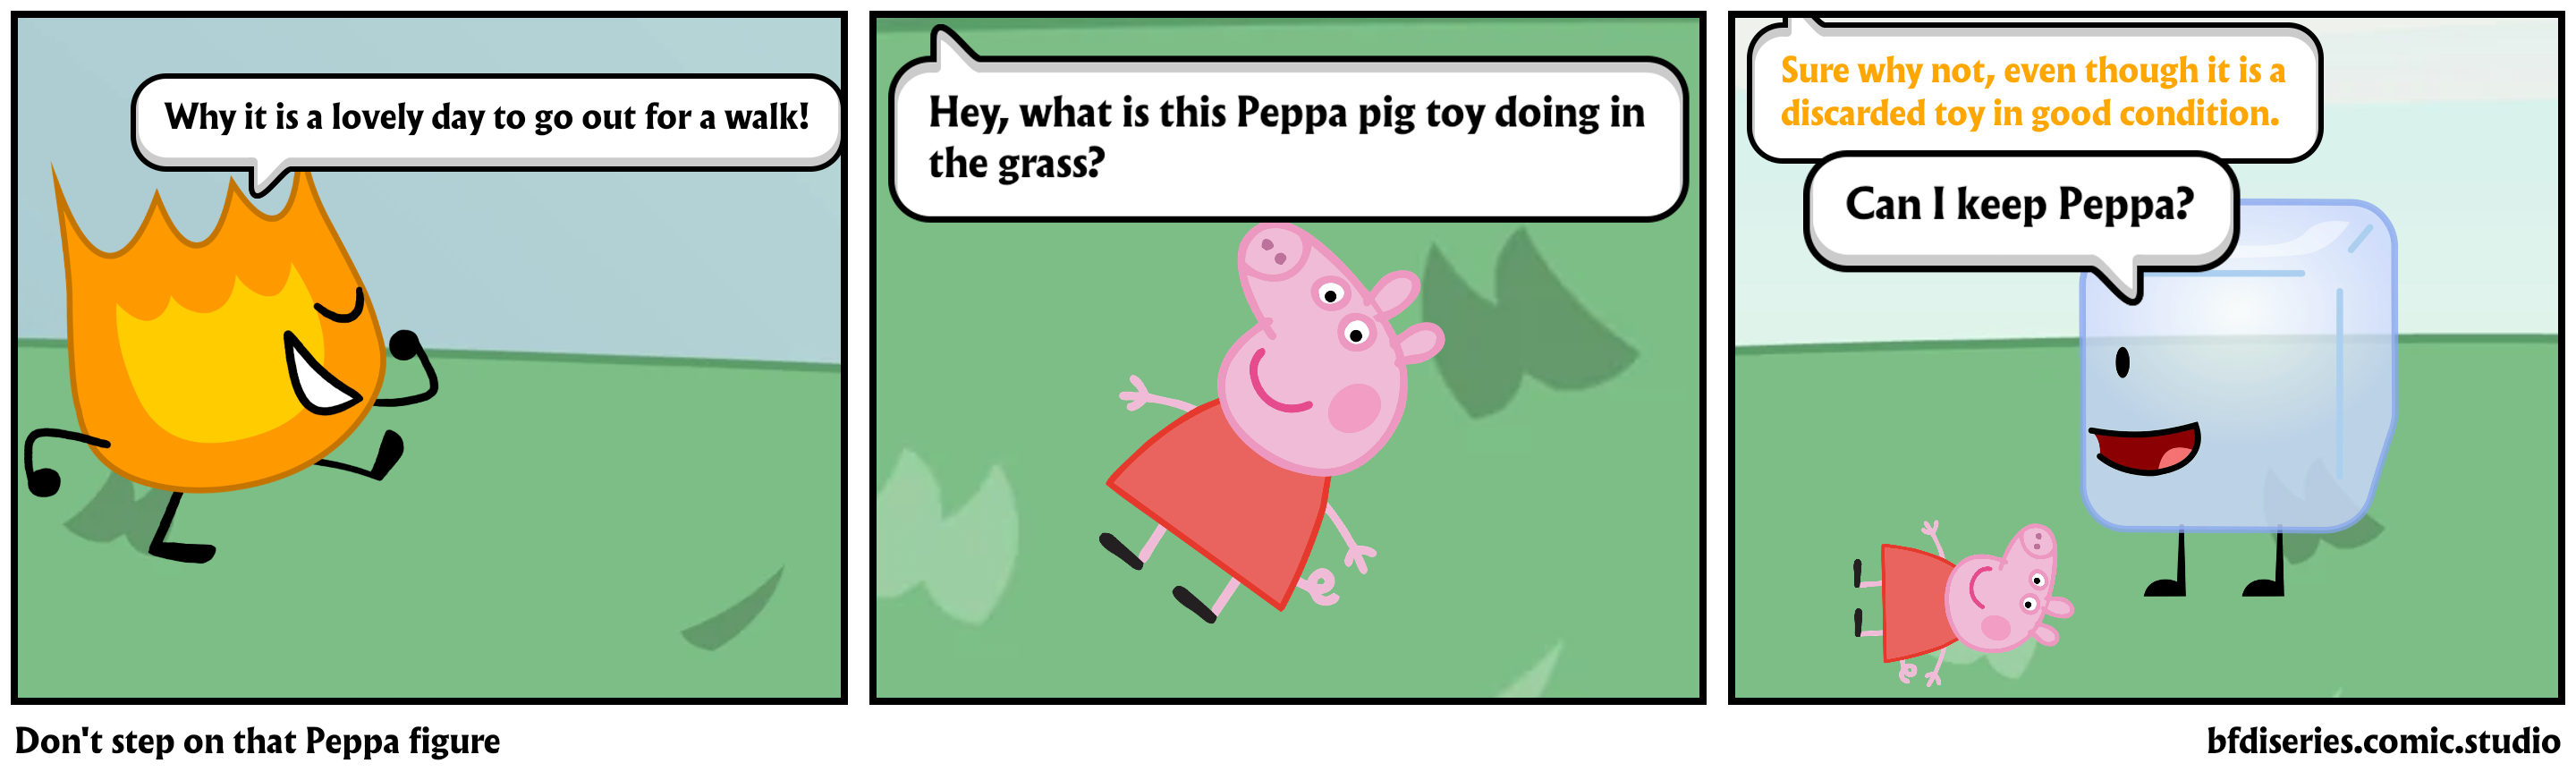 Don't step on that Peppa figure 